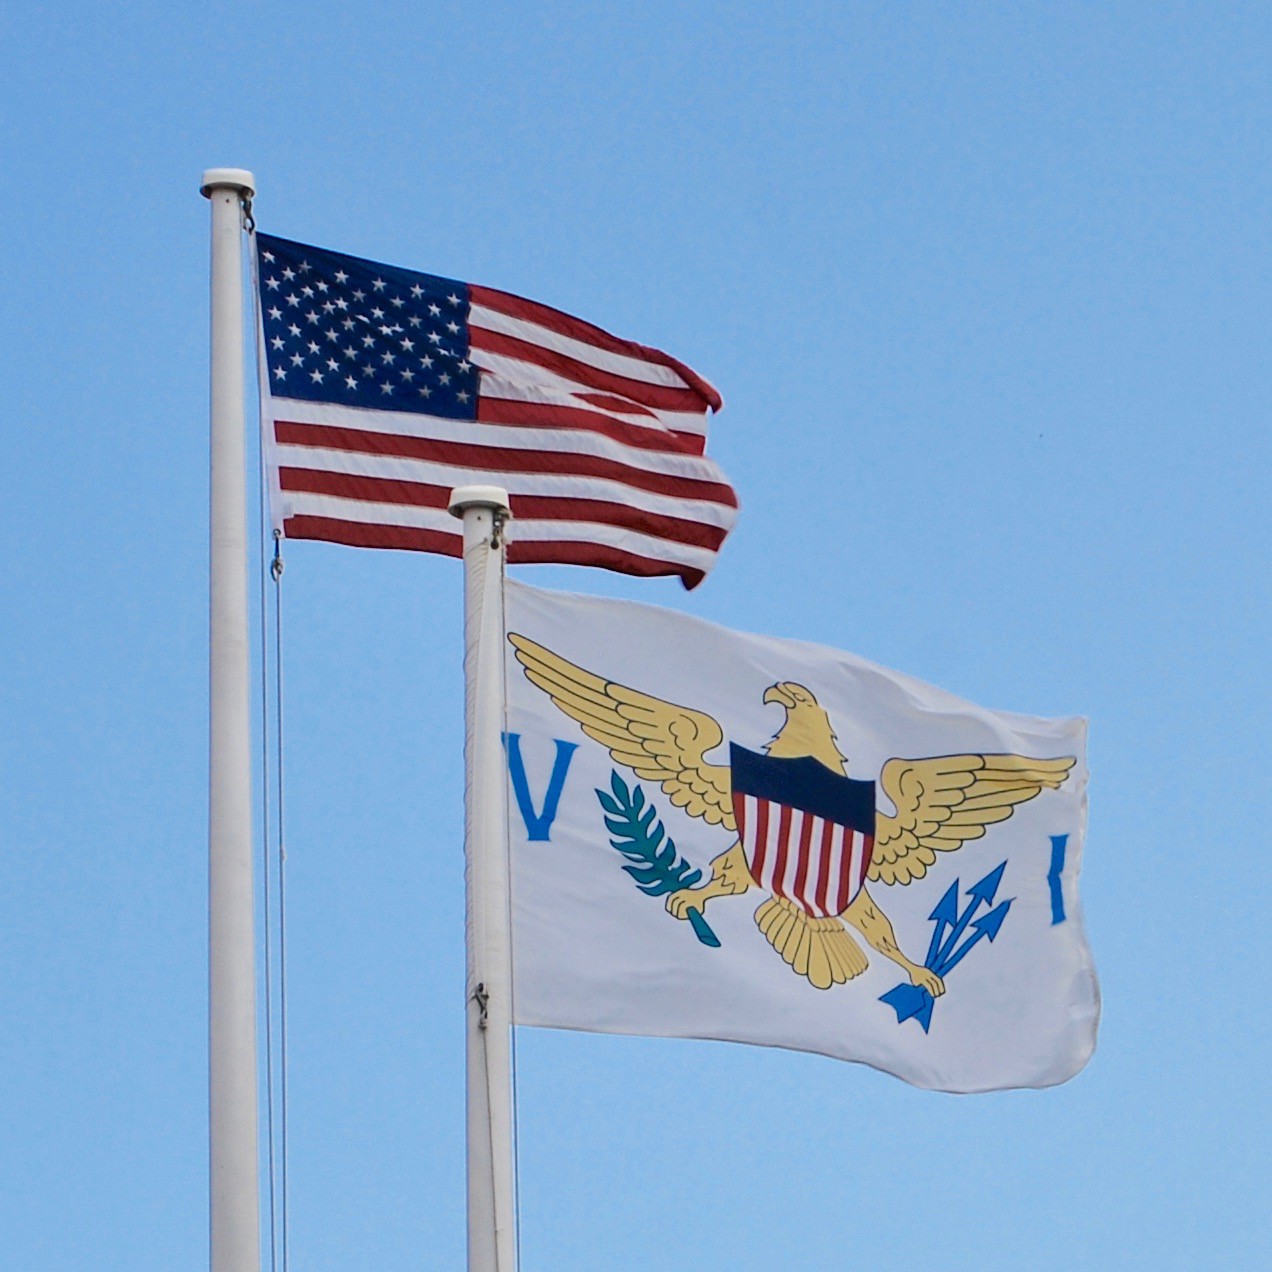 The US Virgin Islands are constitution-less